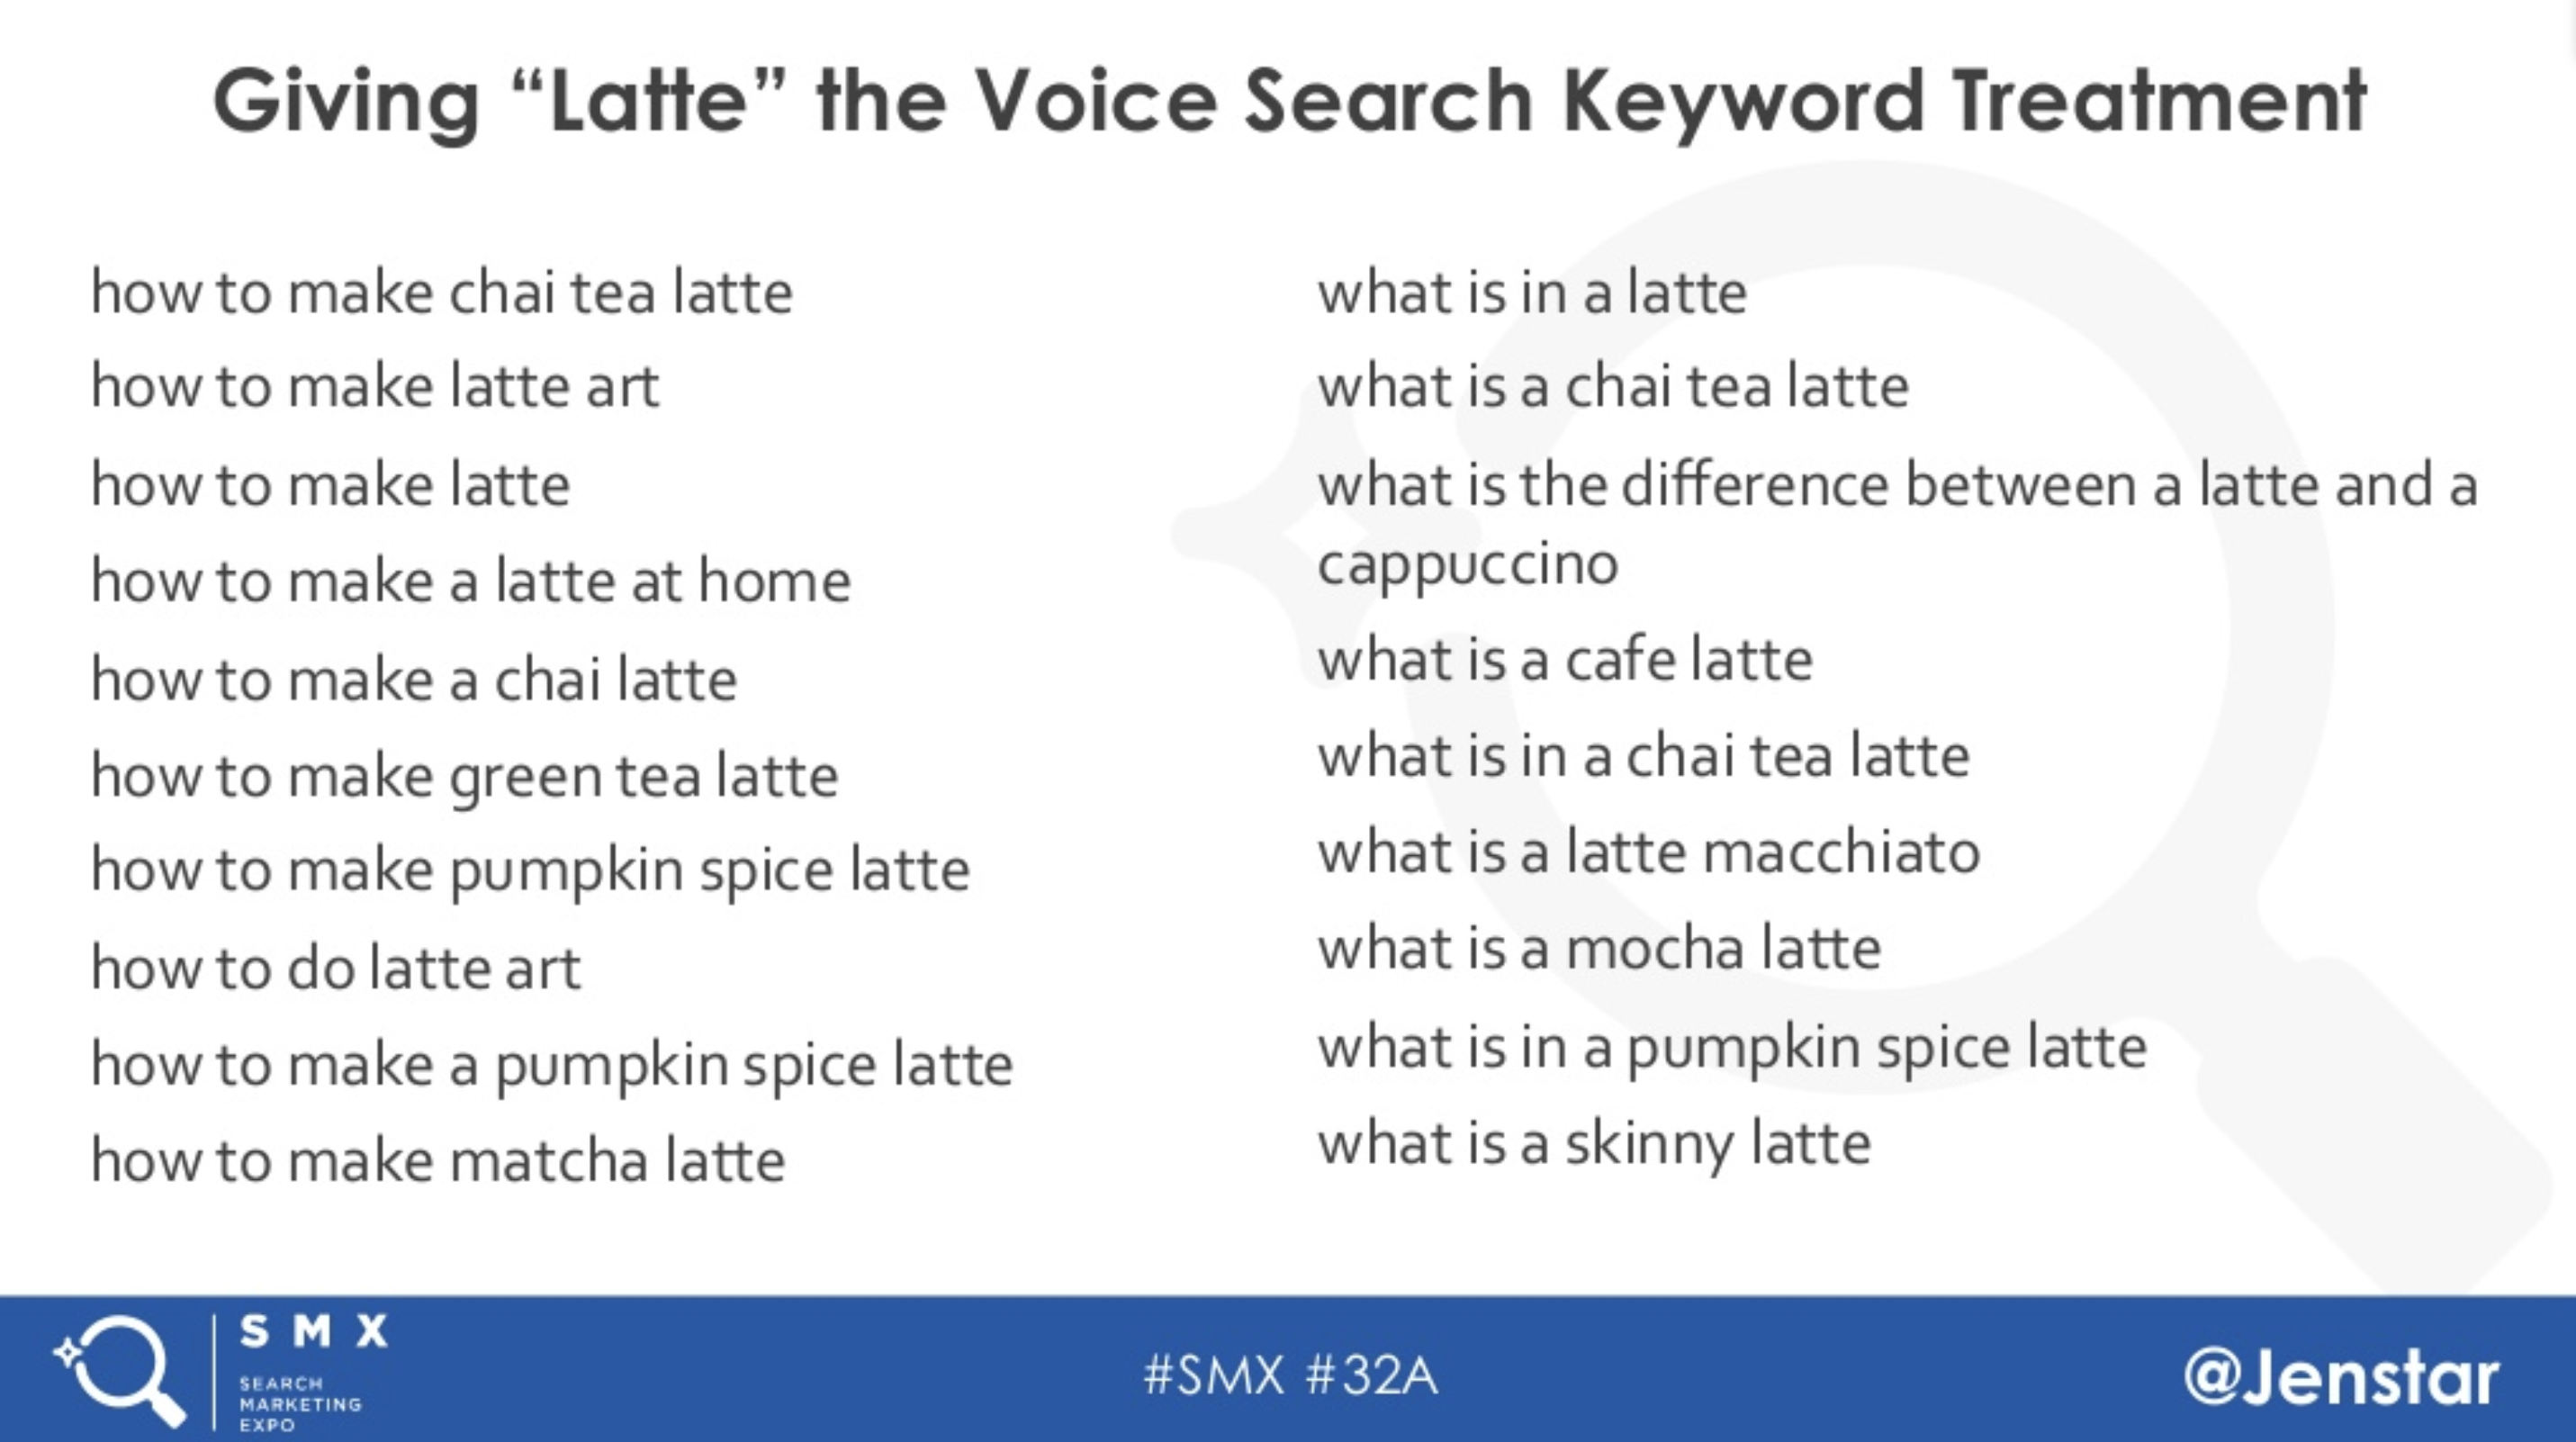 Keywords for voice search